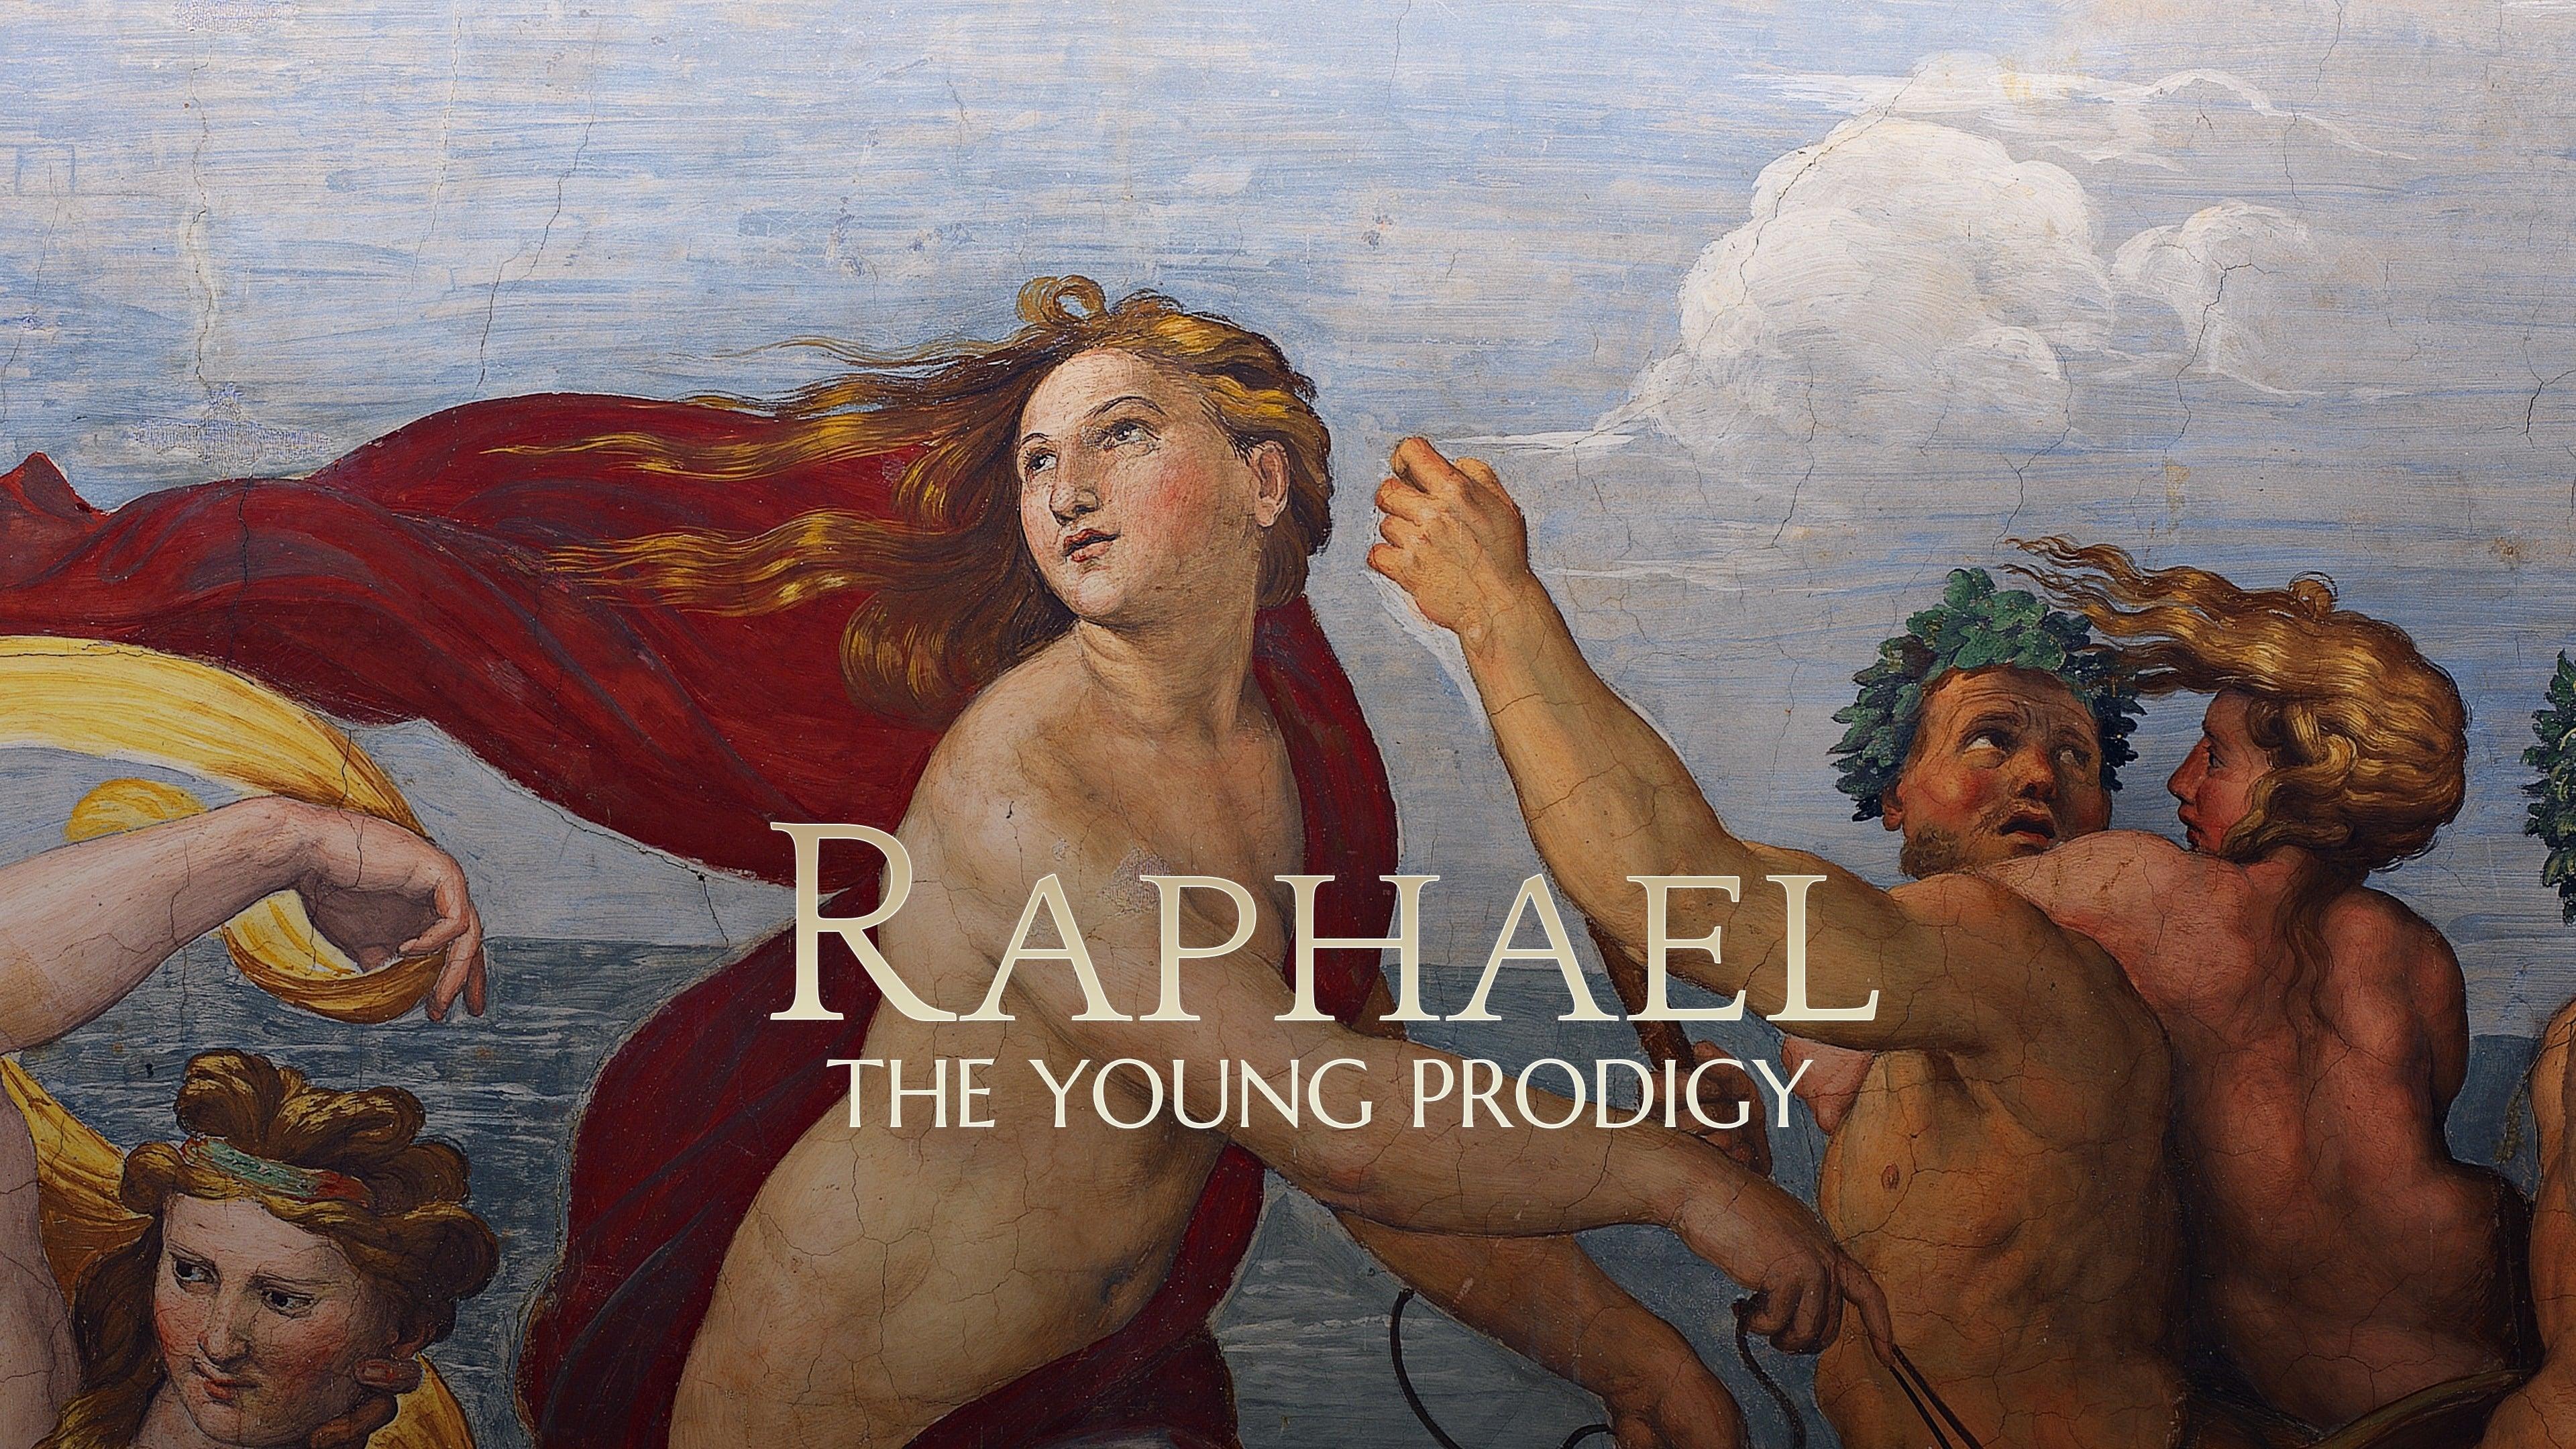 Raphael: The Young Prodigy backdrop